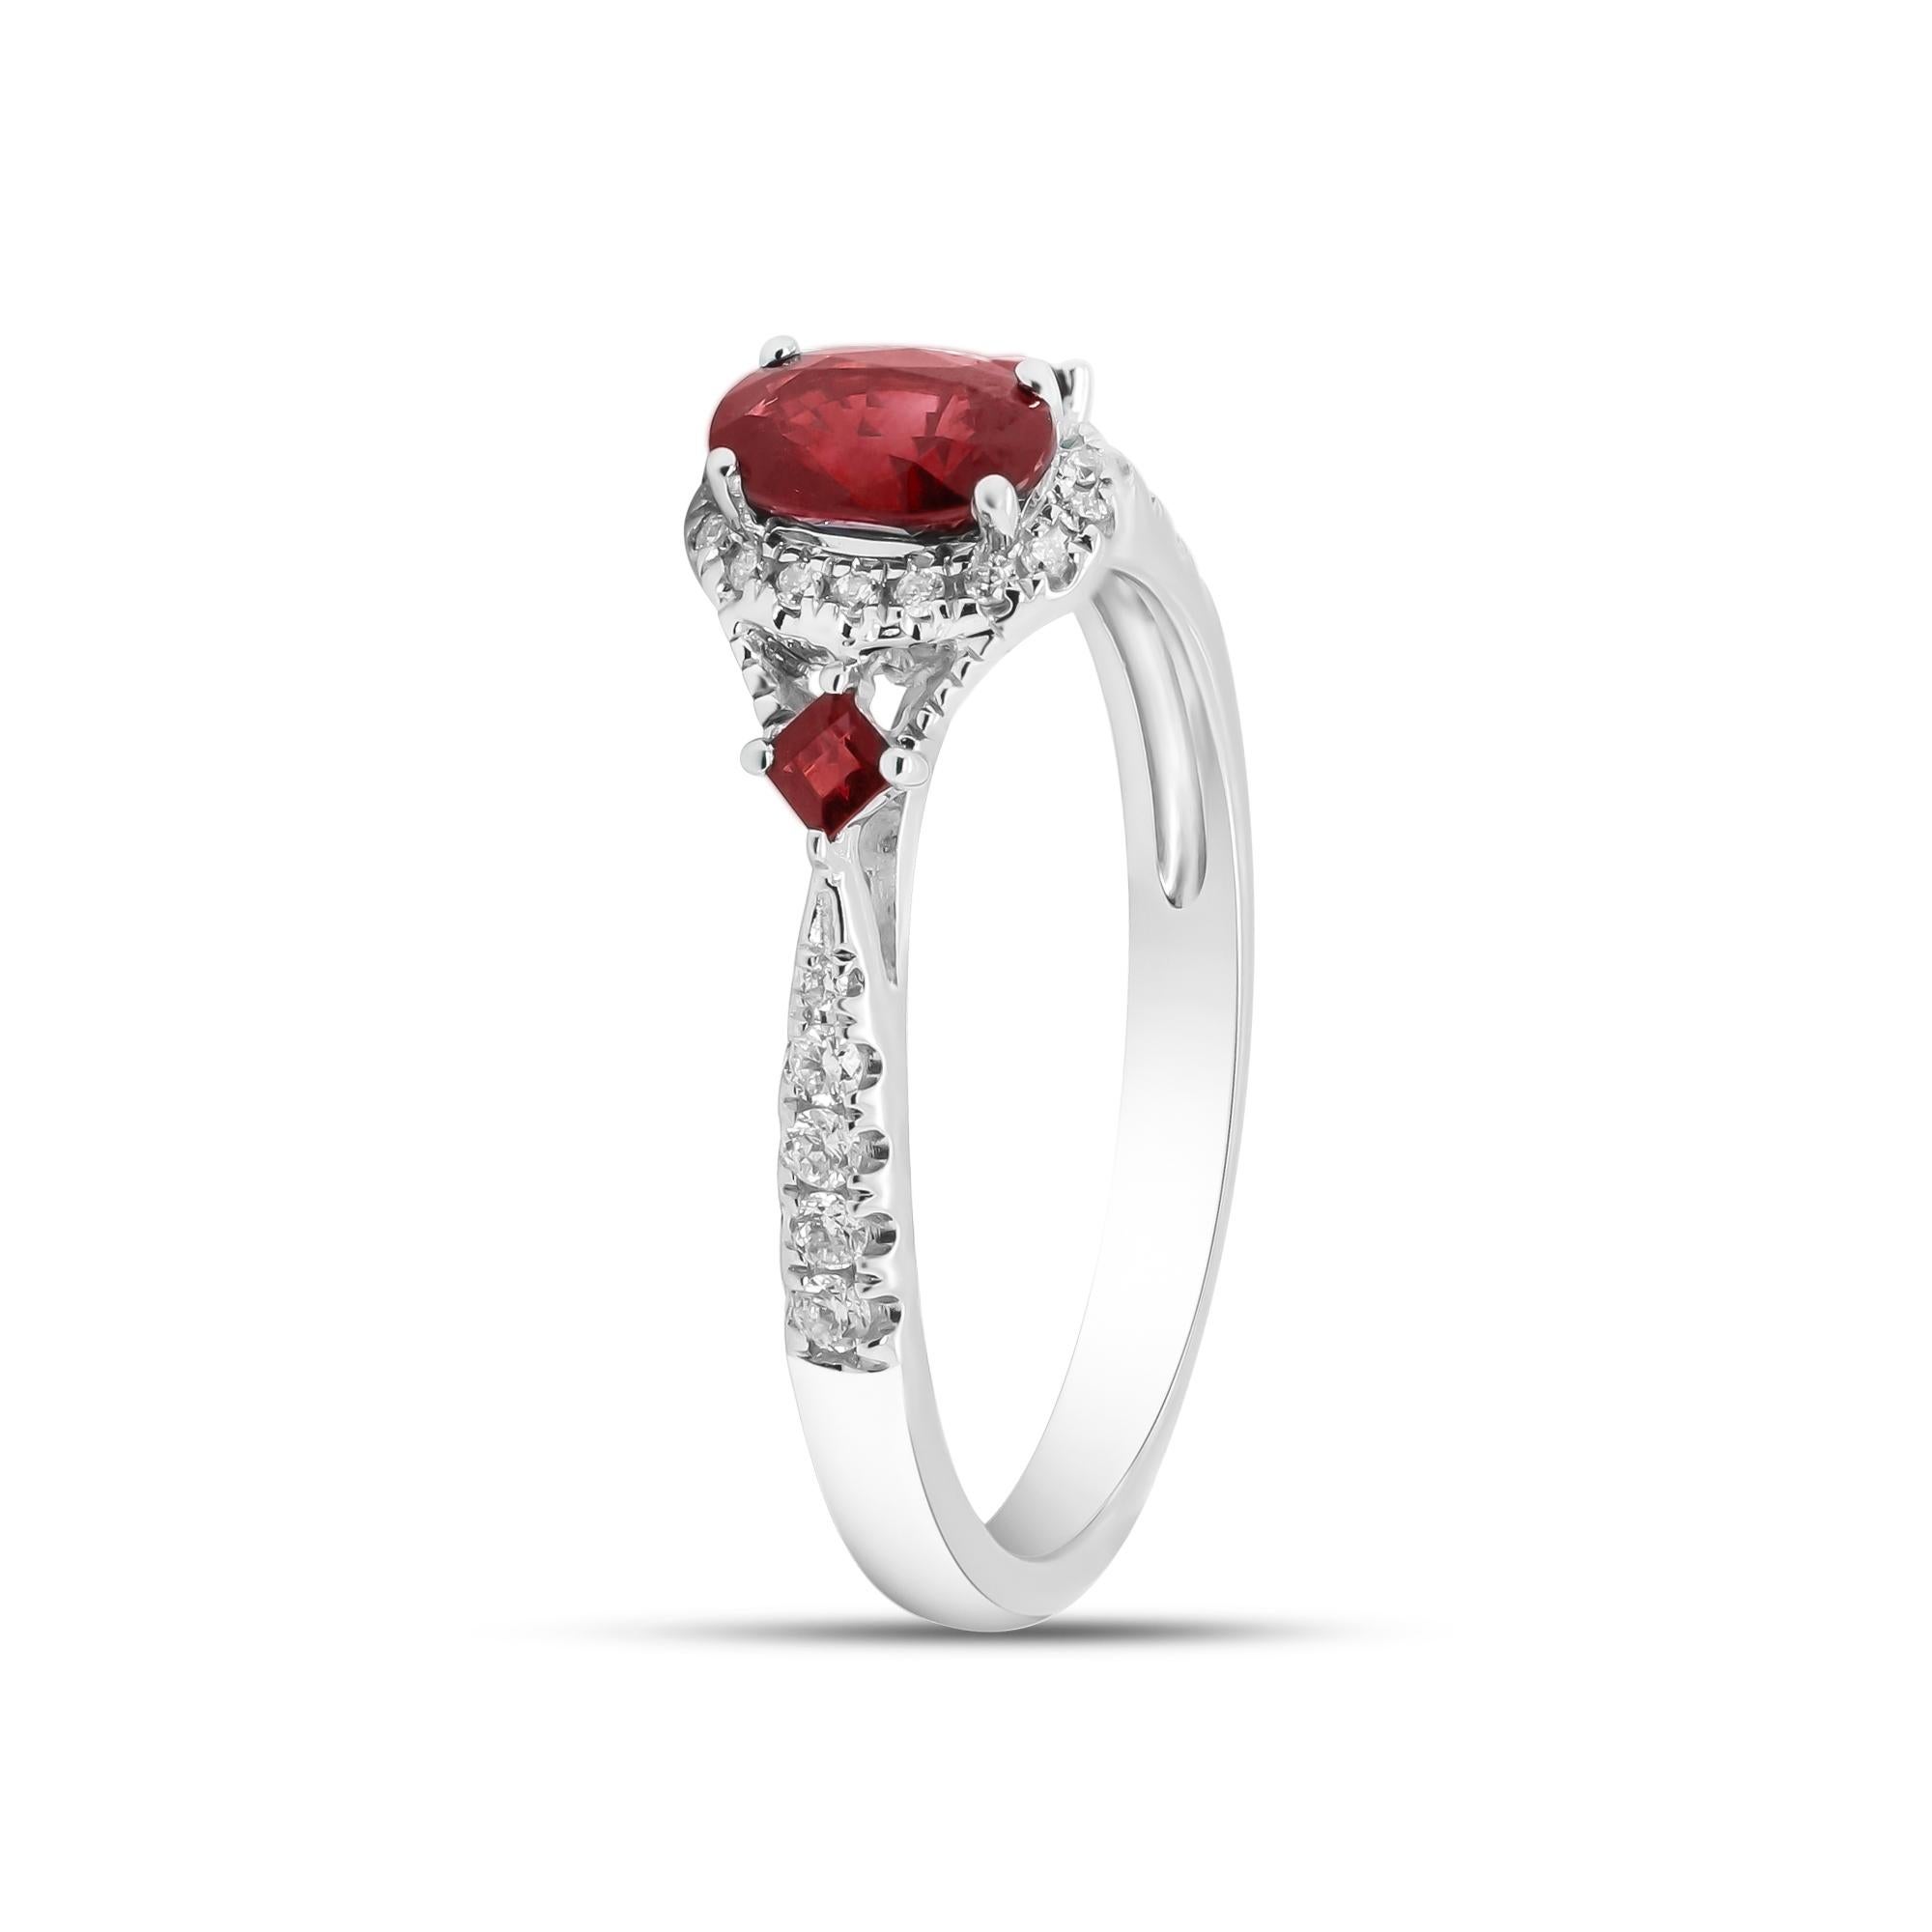 Stunning, timeless and classy eternity Unique Ring. Decorate yourself in luxury with this Gin & Grace Ring. The 14K White Gold jewelry boasts with Oval-cut 1 pcs 0.47 carat, Square-cut 2 pcs 0.14 carat Ruby and Natural Round-cut white Diamond (26